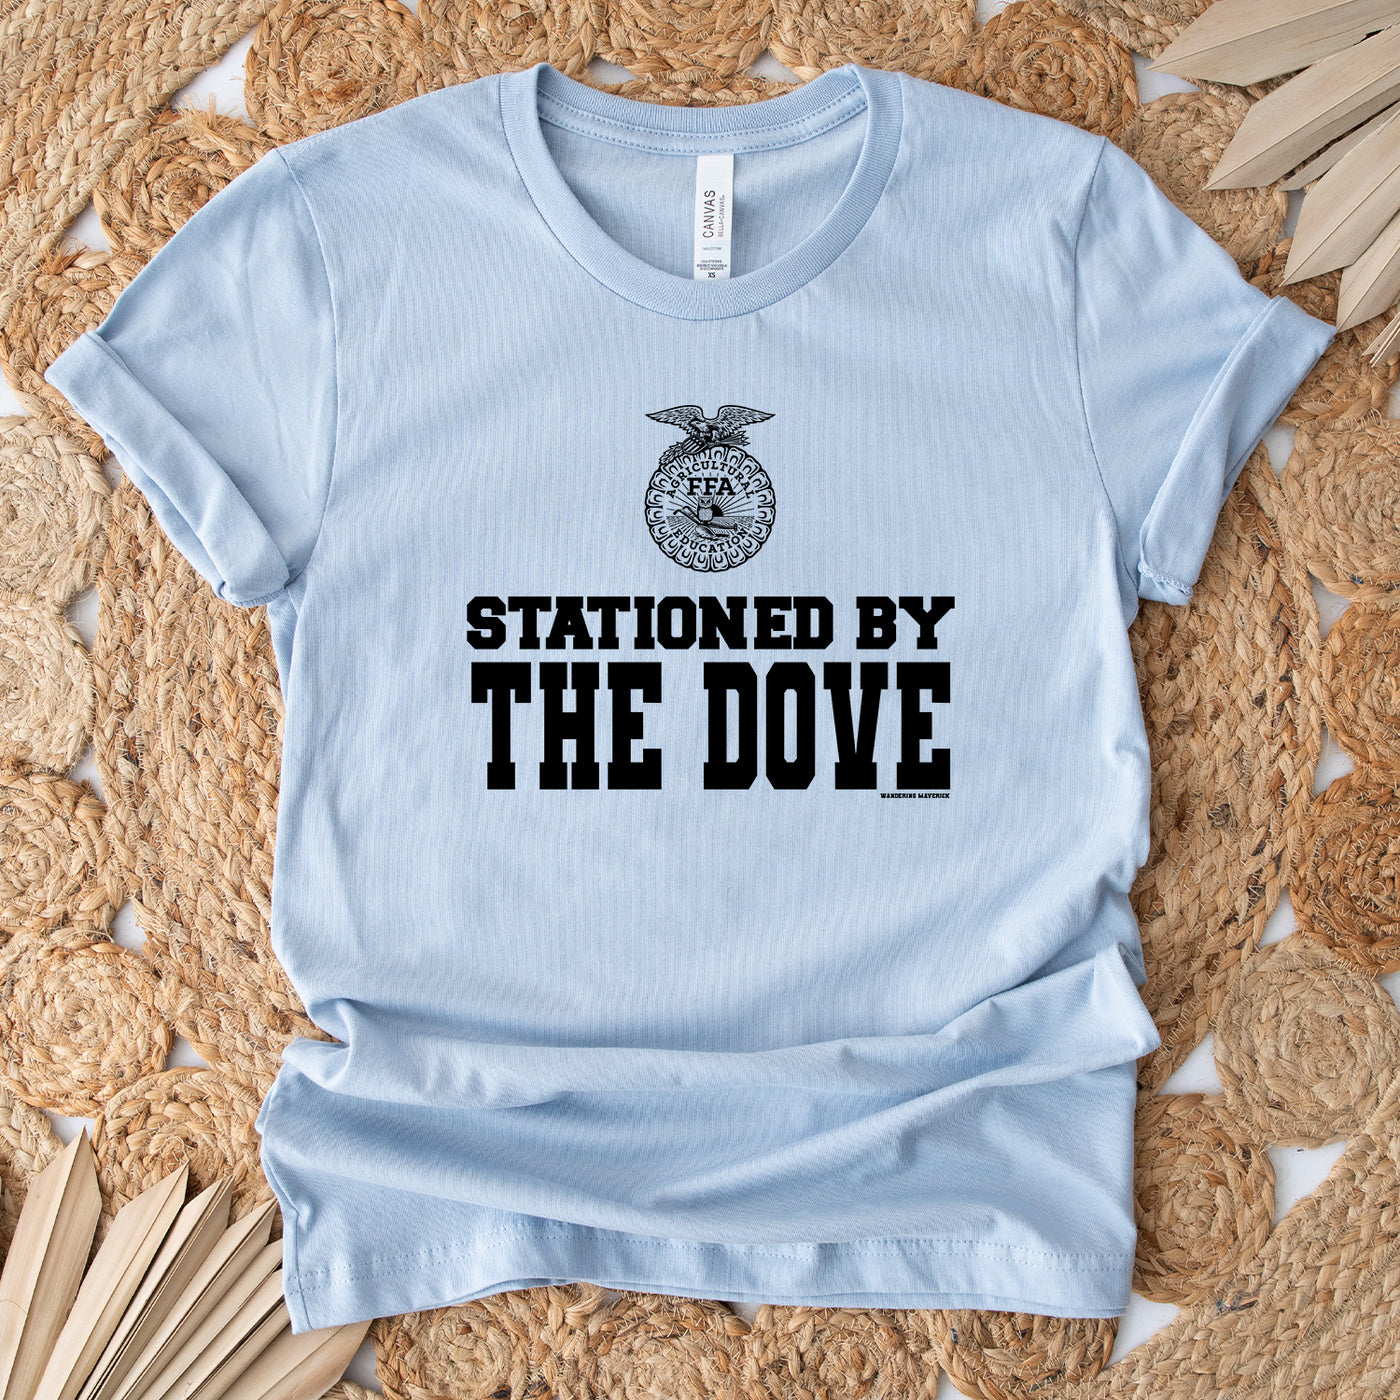 Stationed by the Dove ffa T-Shirt (XS-4XL) - Multiple Colors!